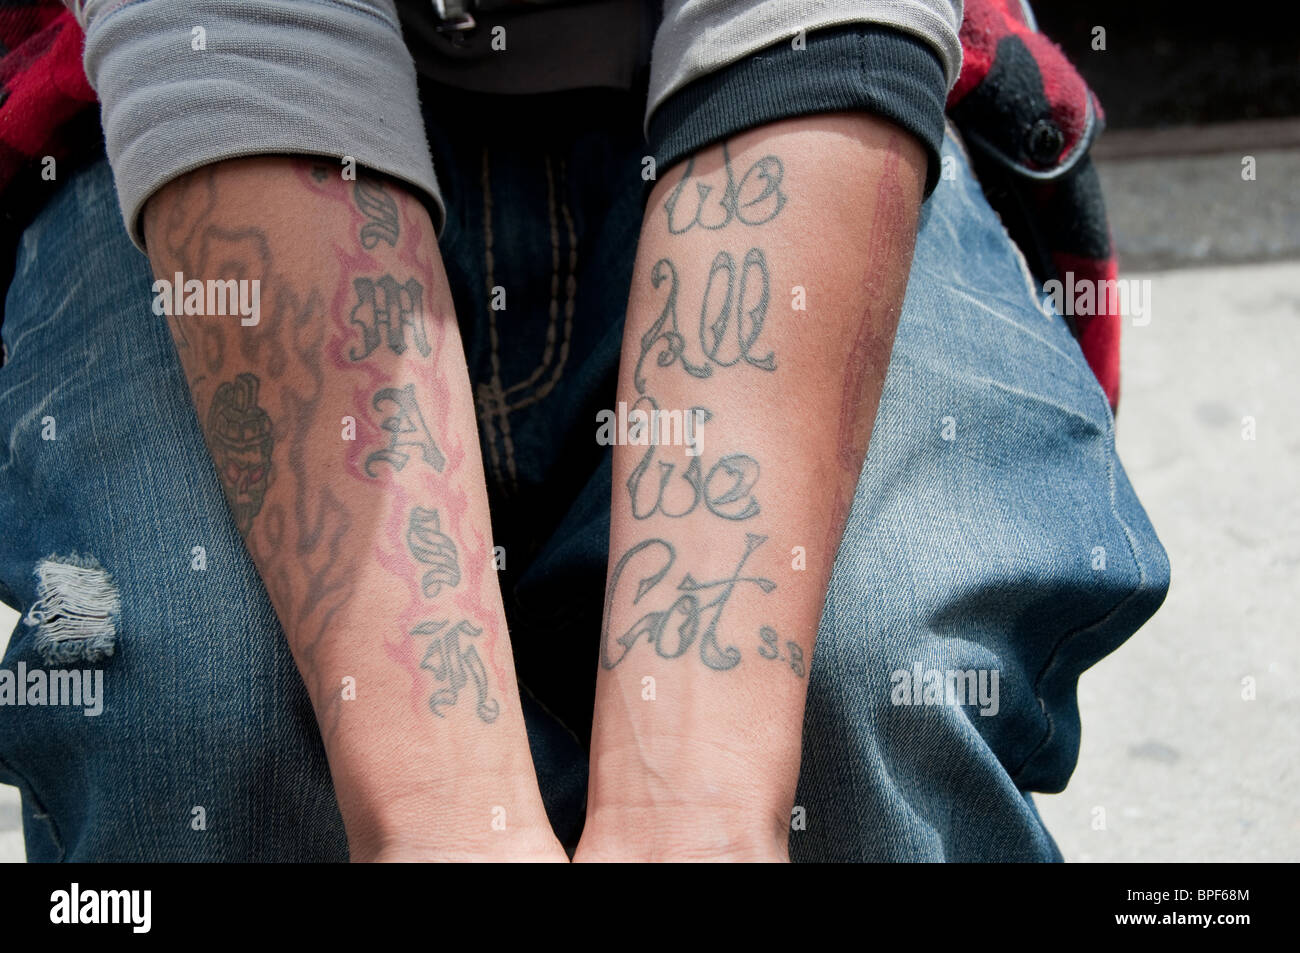 Tattoos on lower arms with words arms Stock Photo